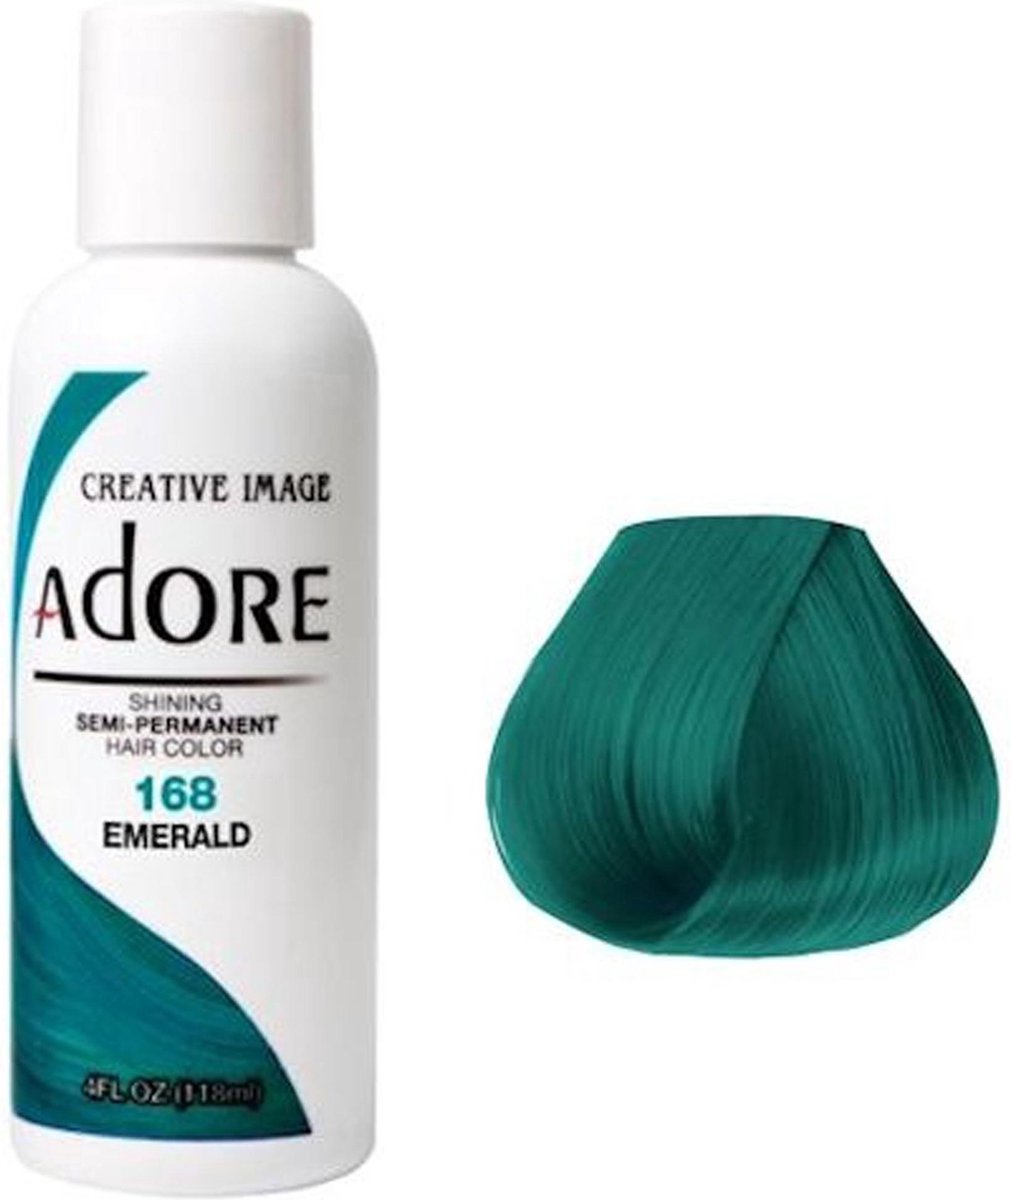 Adore Shining Semi Permanent Hair Color Emerald-168 haarverf